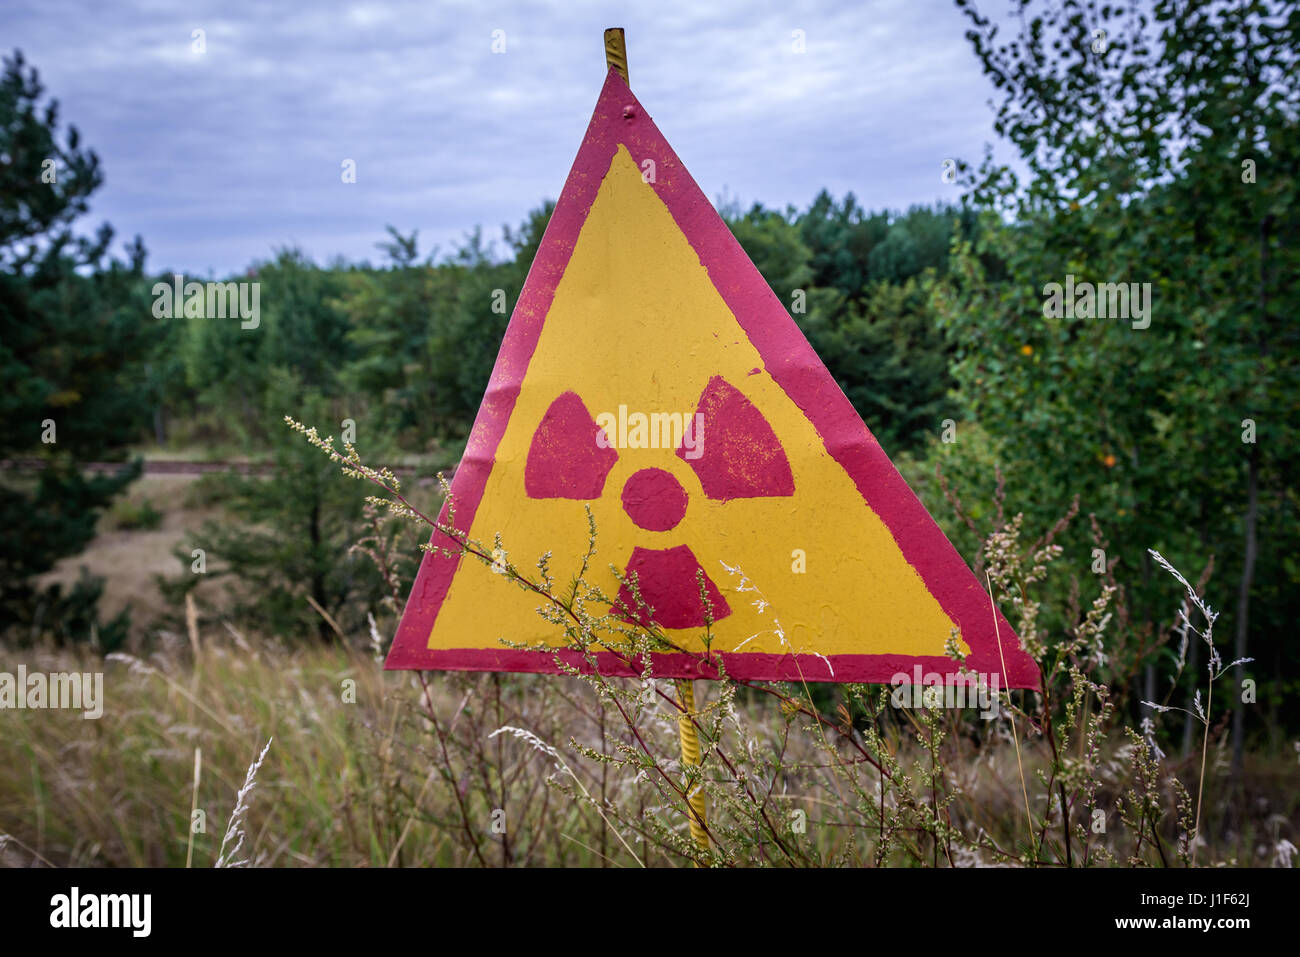 Warning sign in so called Red Forest area surrounding Chernobyl Nuclear Power Plant, Zone of Alienation, Ukraine Stock Photo